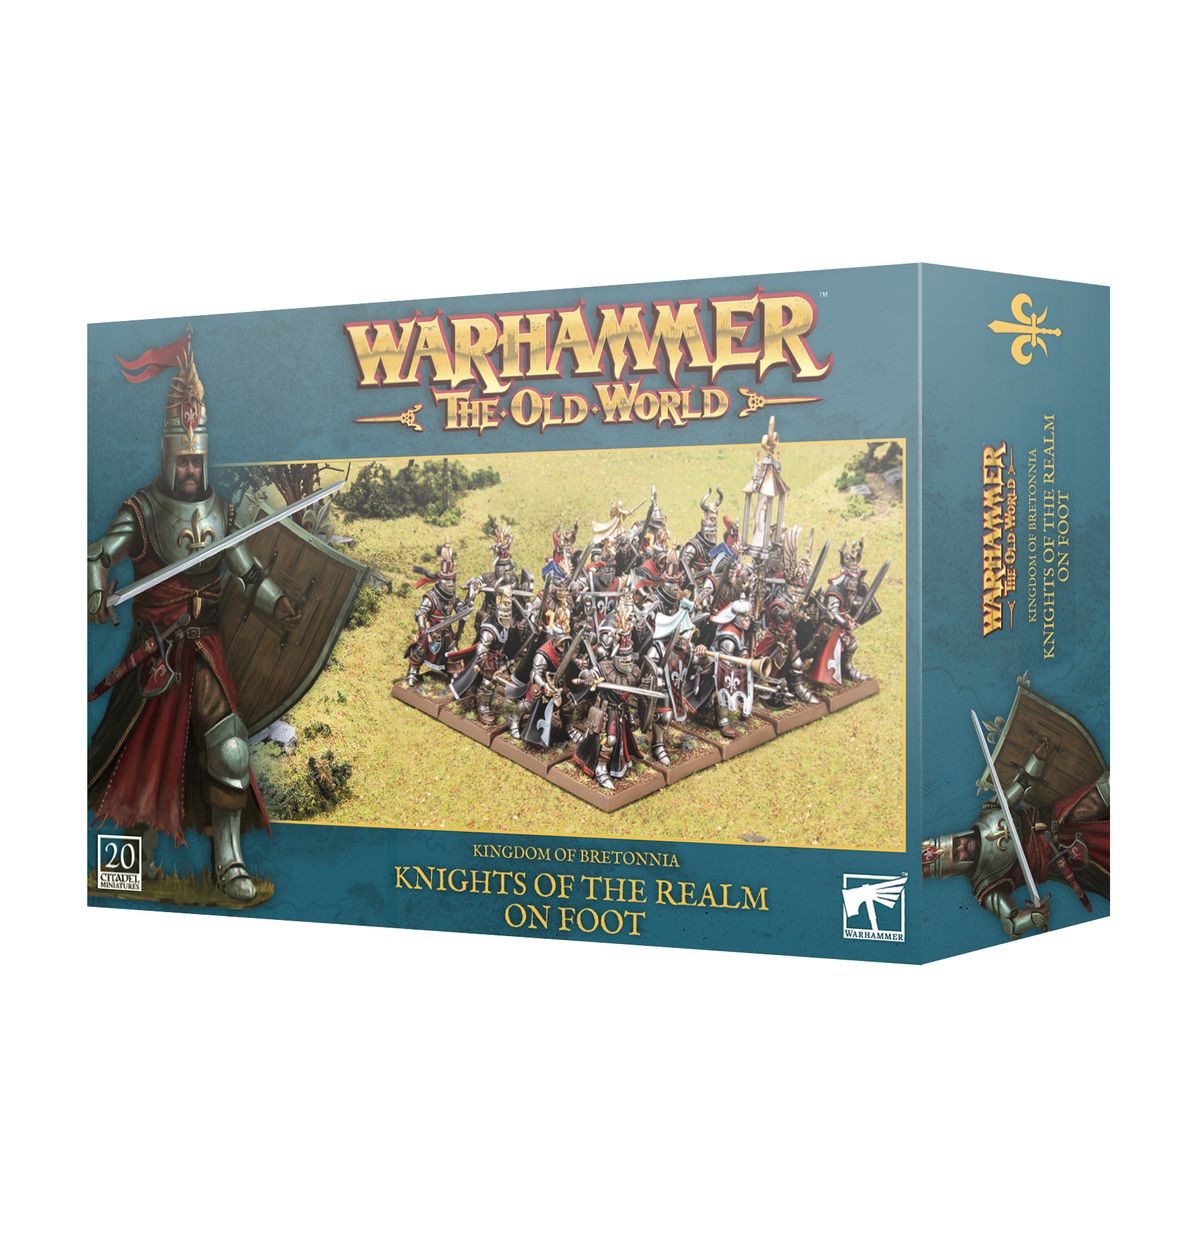 Warhammer The Old World - Kingdom of Bretonnia: Knights of the Realm on Foot